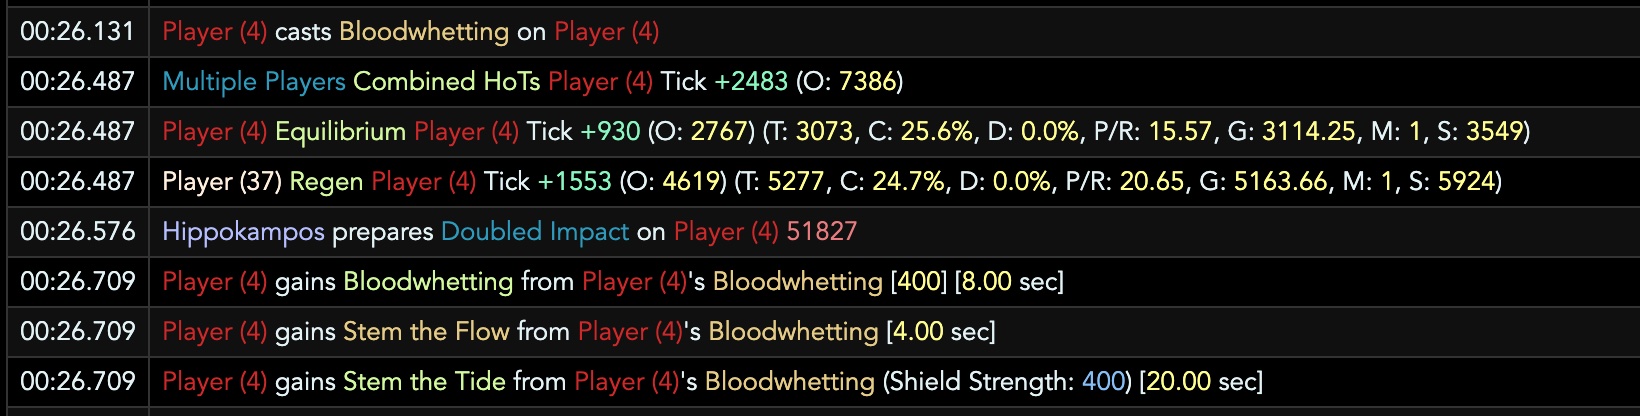 Bloodwhetting
    pressed before the damage snapshot but the buffs were applied after.